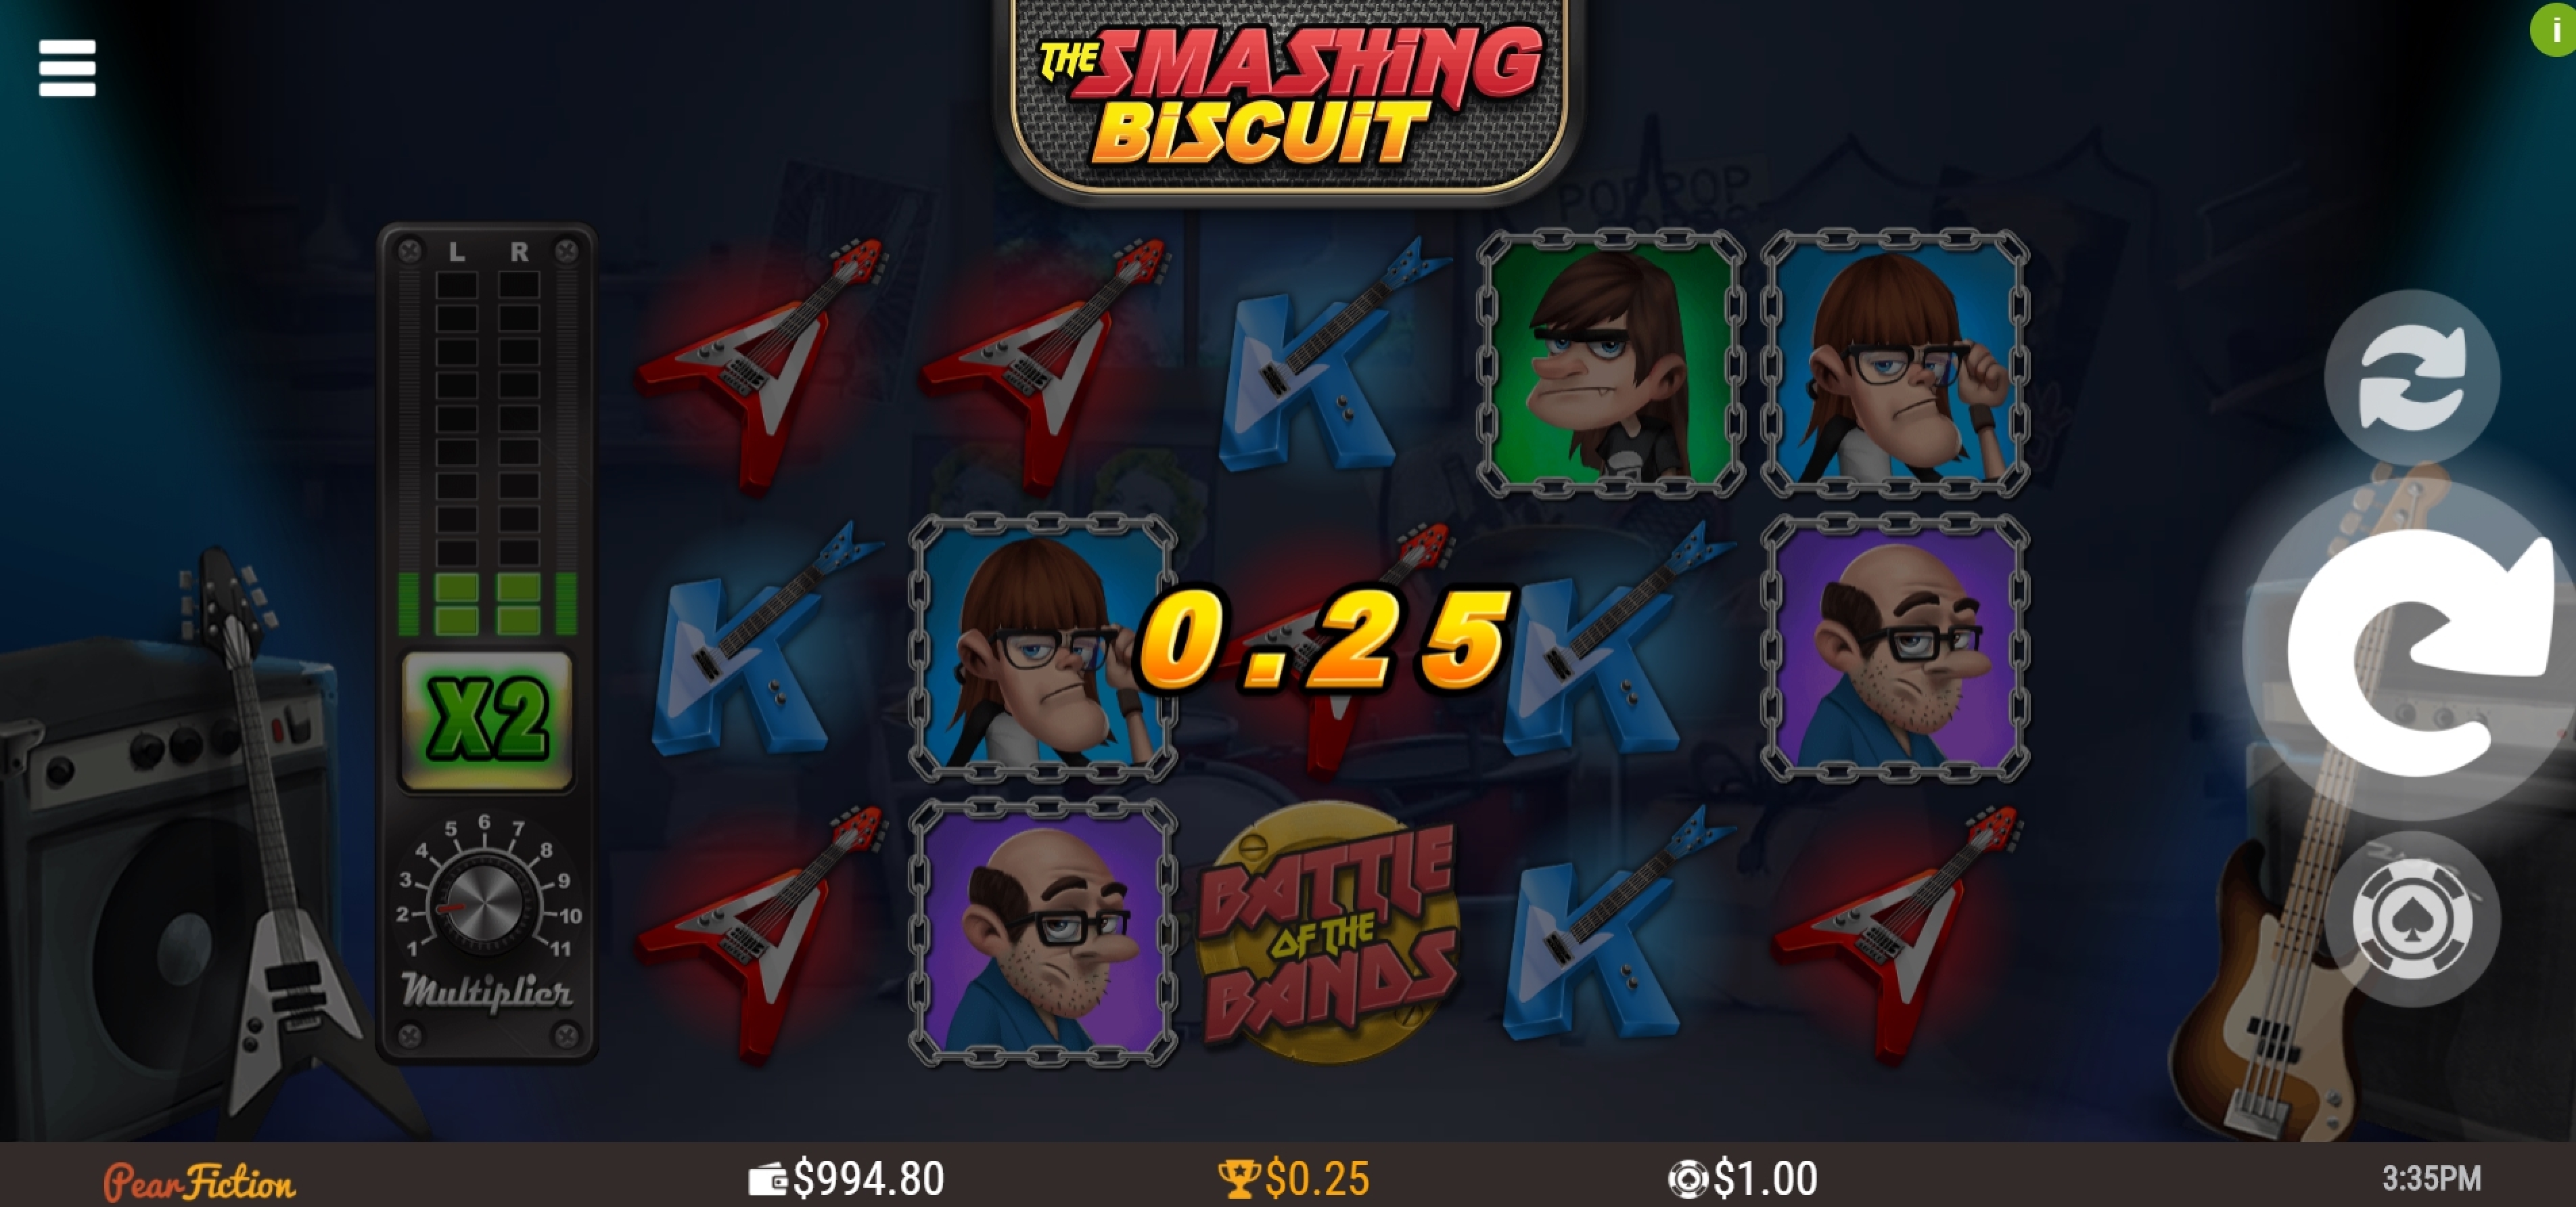 Win Money in The Smashing Biscuit Free Slot Game by PearFiction Studios